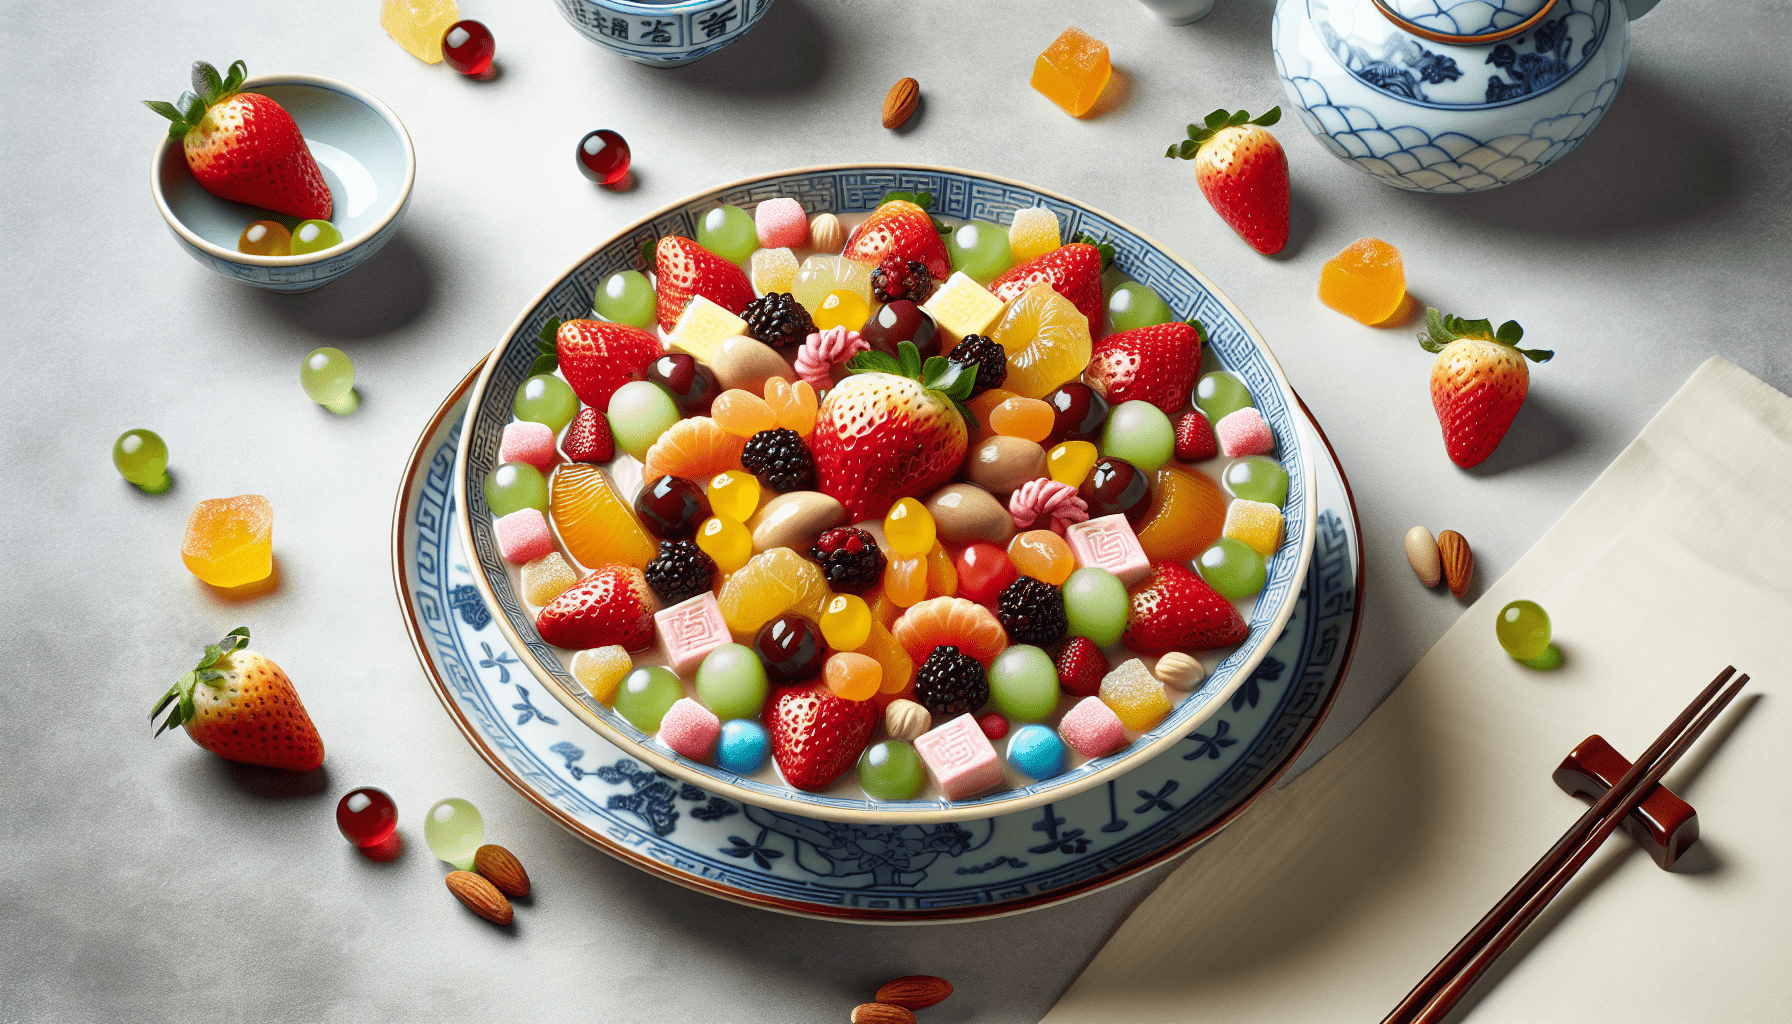 Can You Suggest A Light And Nutritious Chinese Dessert Recipe?